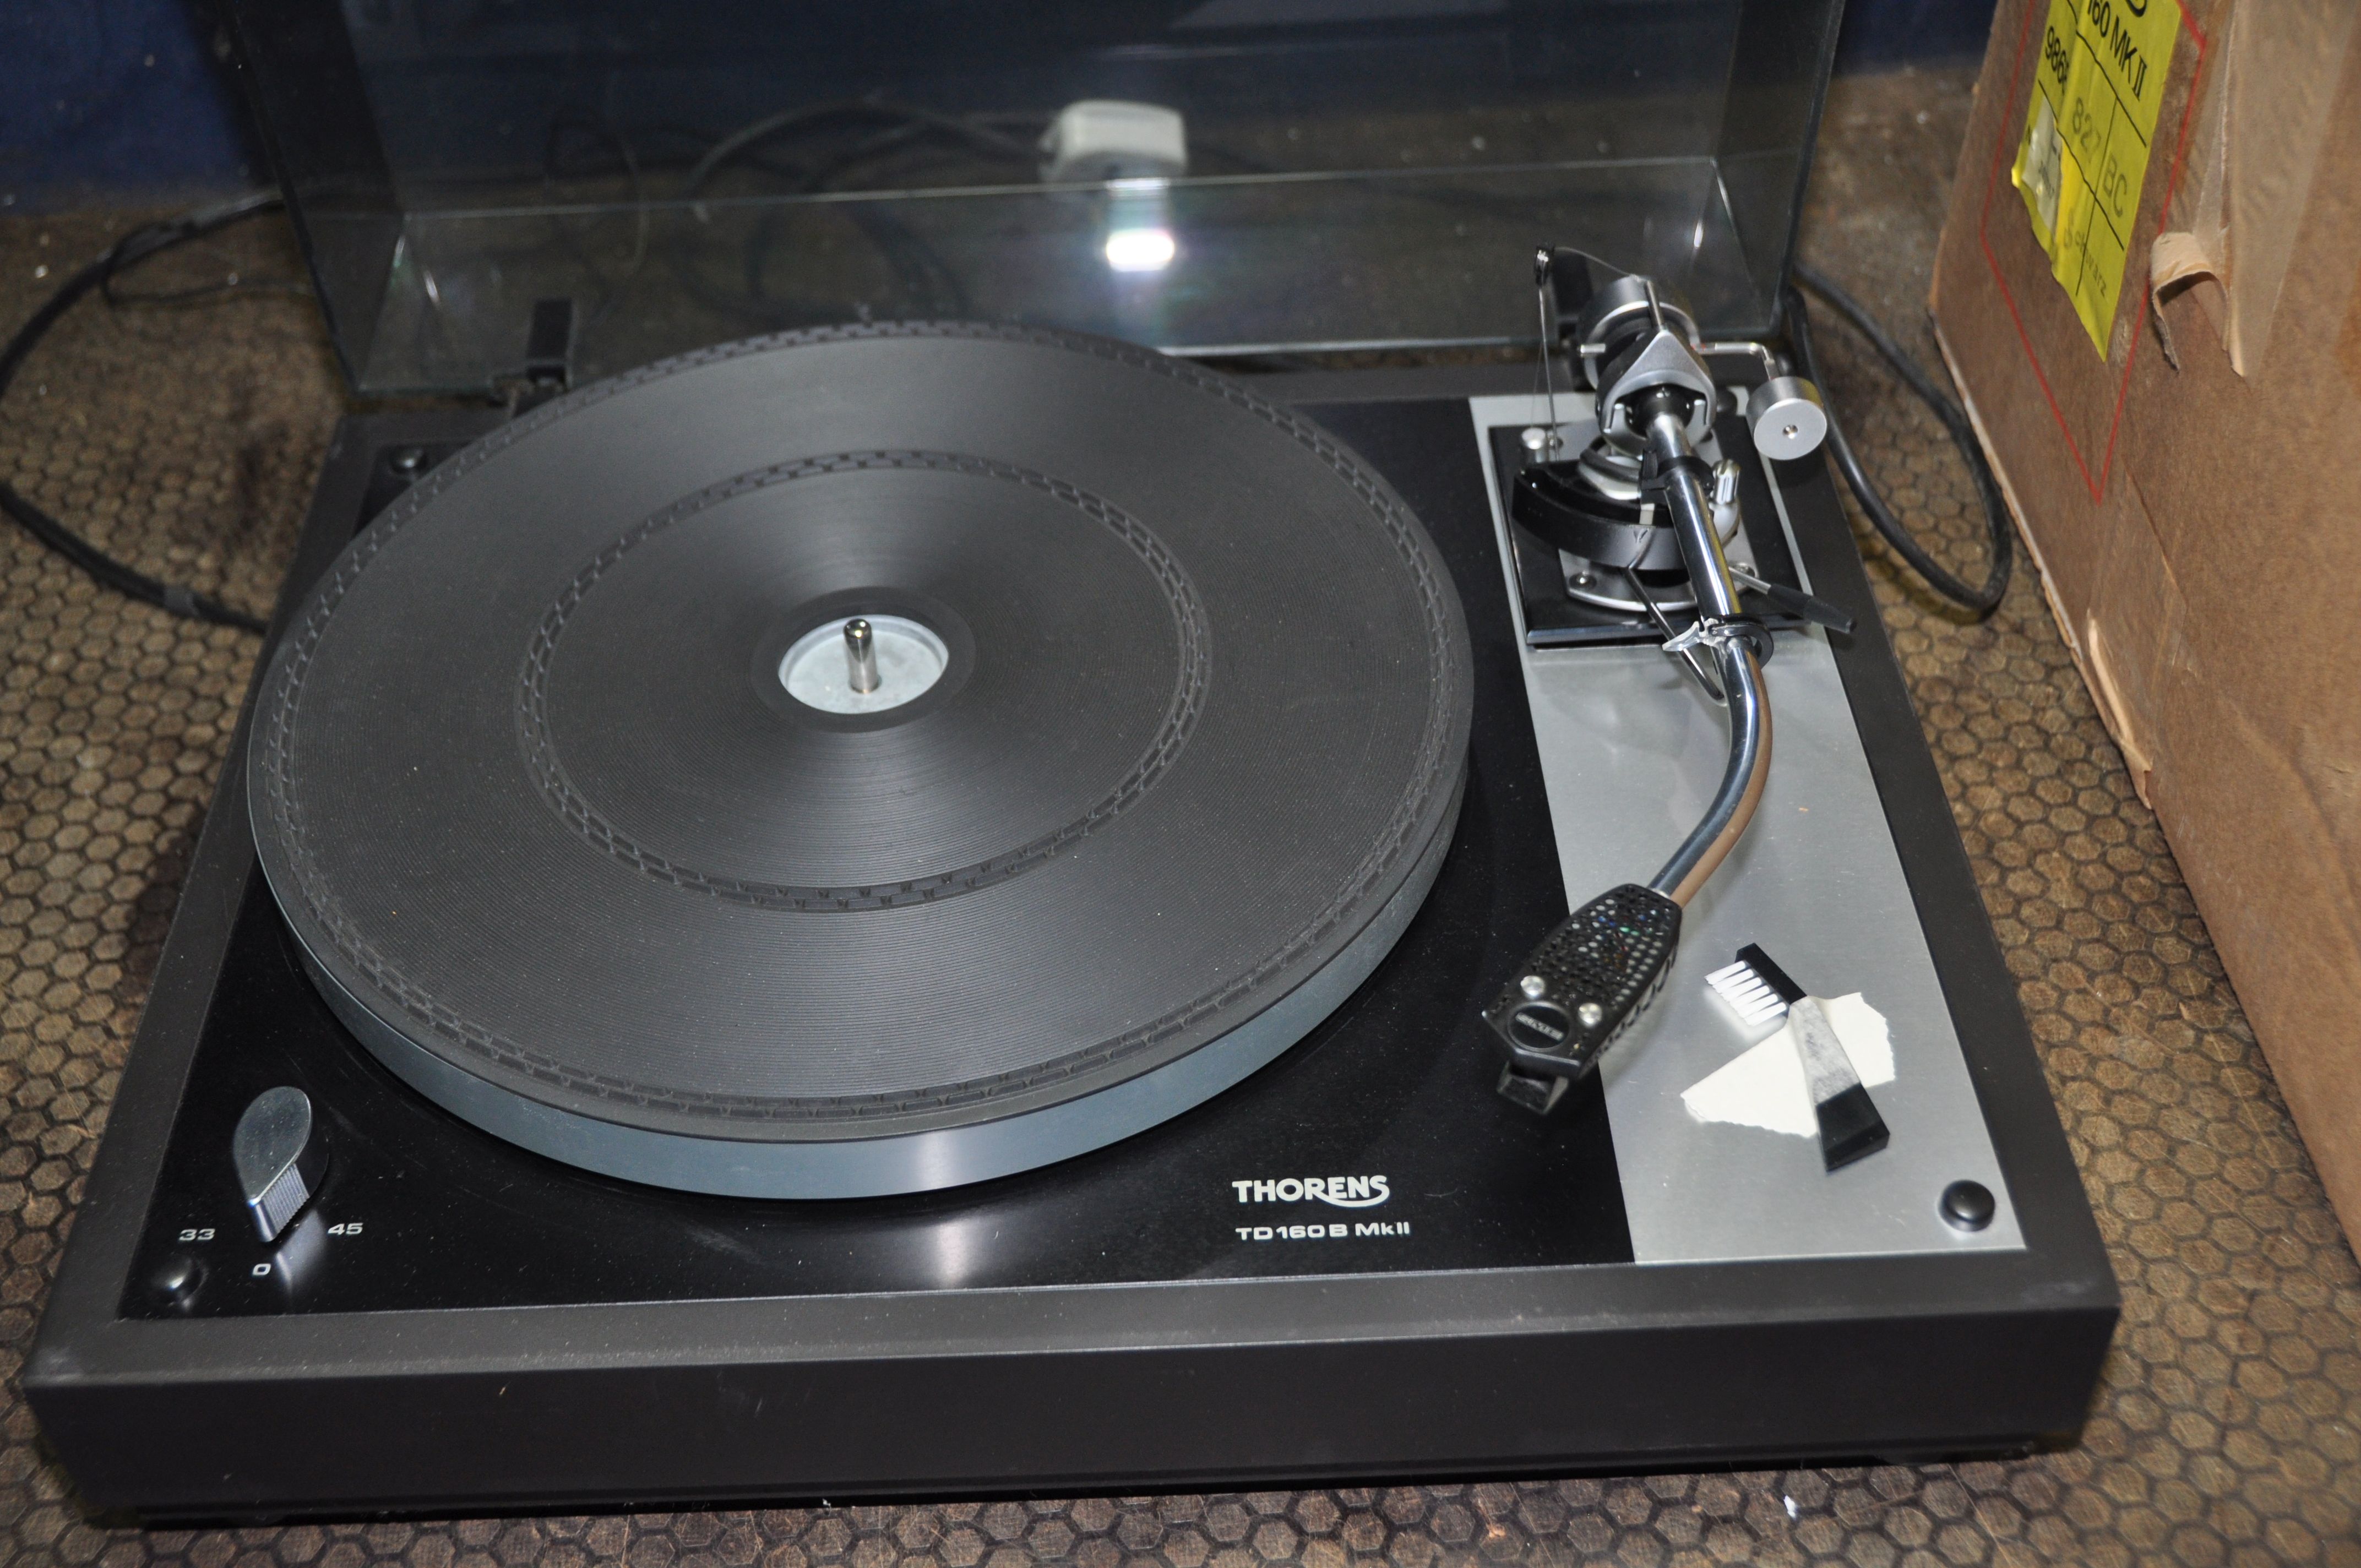 A THORENS TD160B Mk2 TURNTABLE with an SME tone arm and Ortofon VMS20E Mk2 cartridge in original box - Image 3 of 6